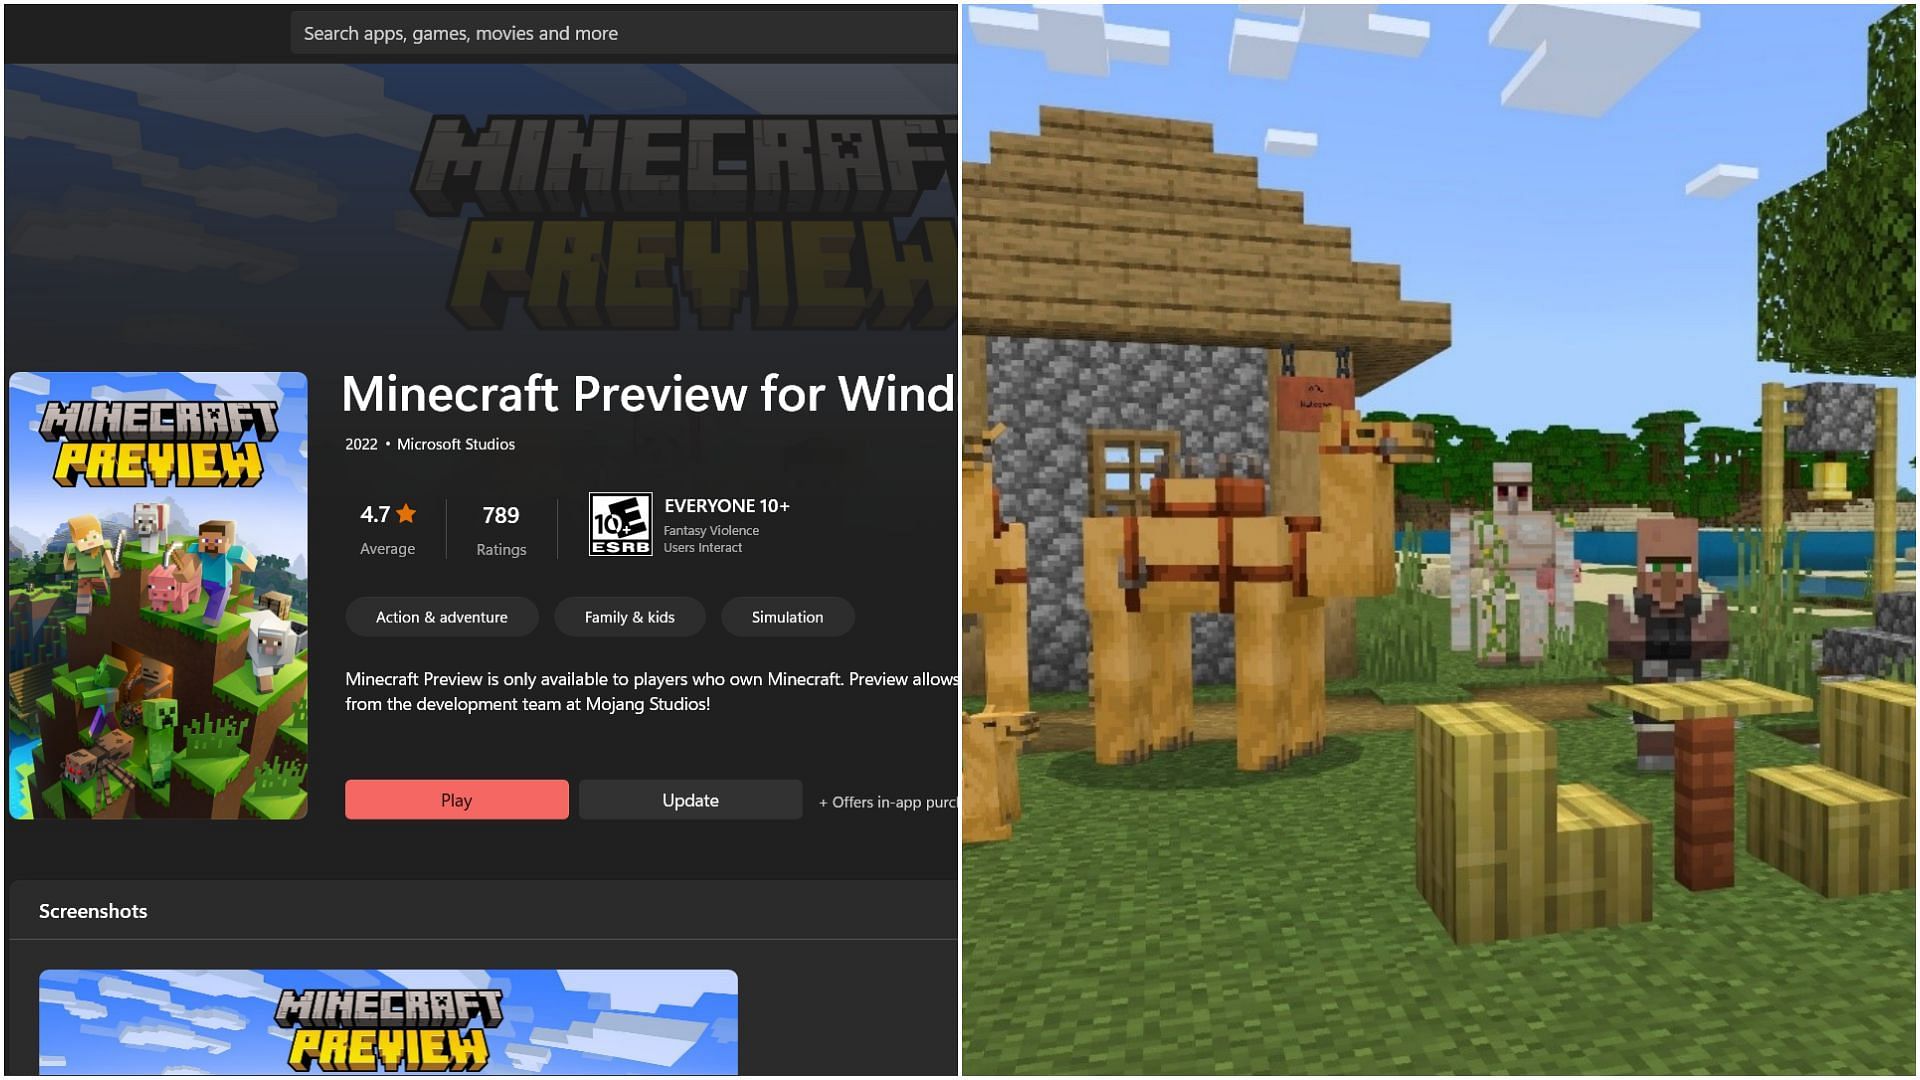 Installing or updating Minecraft Preview is extremely easy (Image via Sportskeeda)